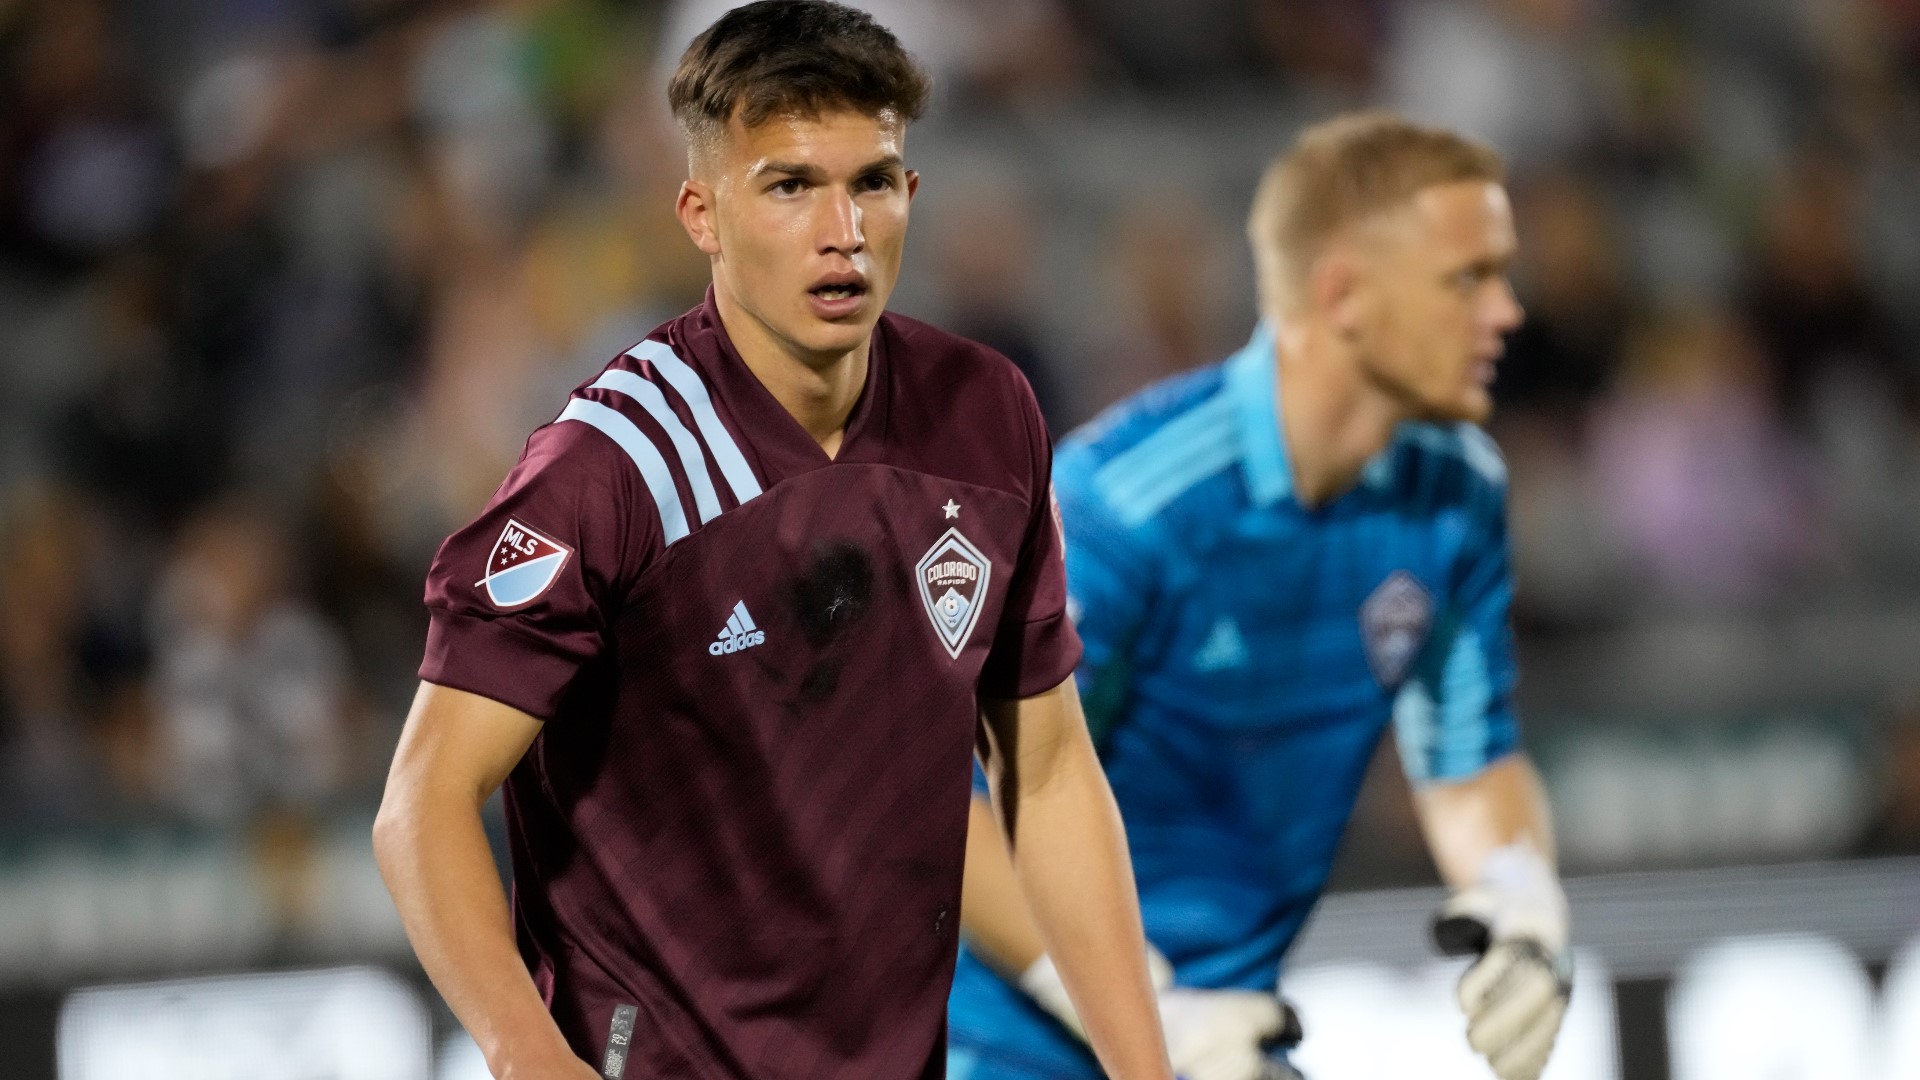 After a year of playing overseas, the midfielder feels even more confident about his game and is ready to bring the Rapids back to the MLS Playoffs.